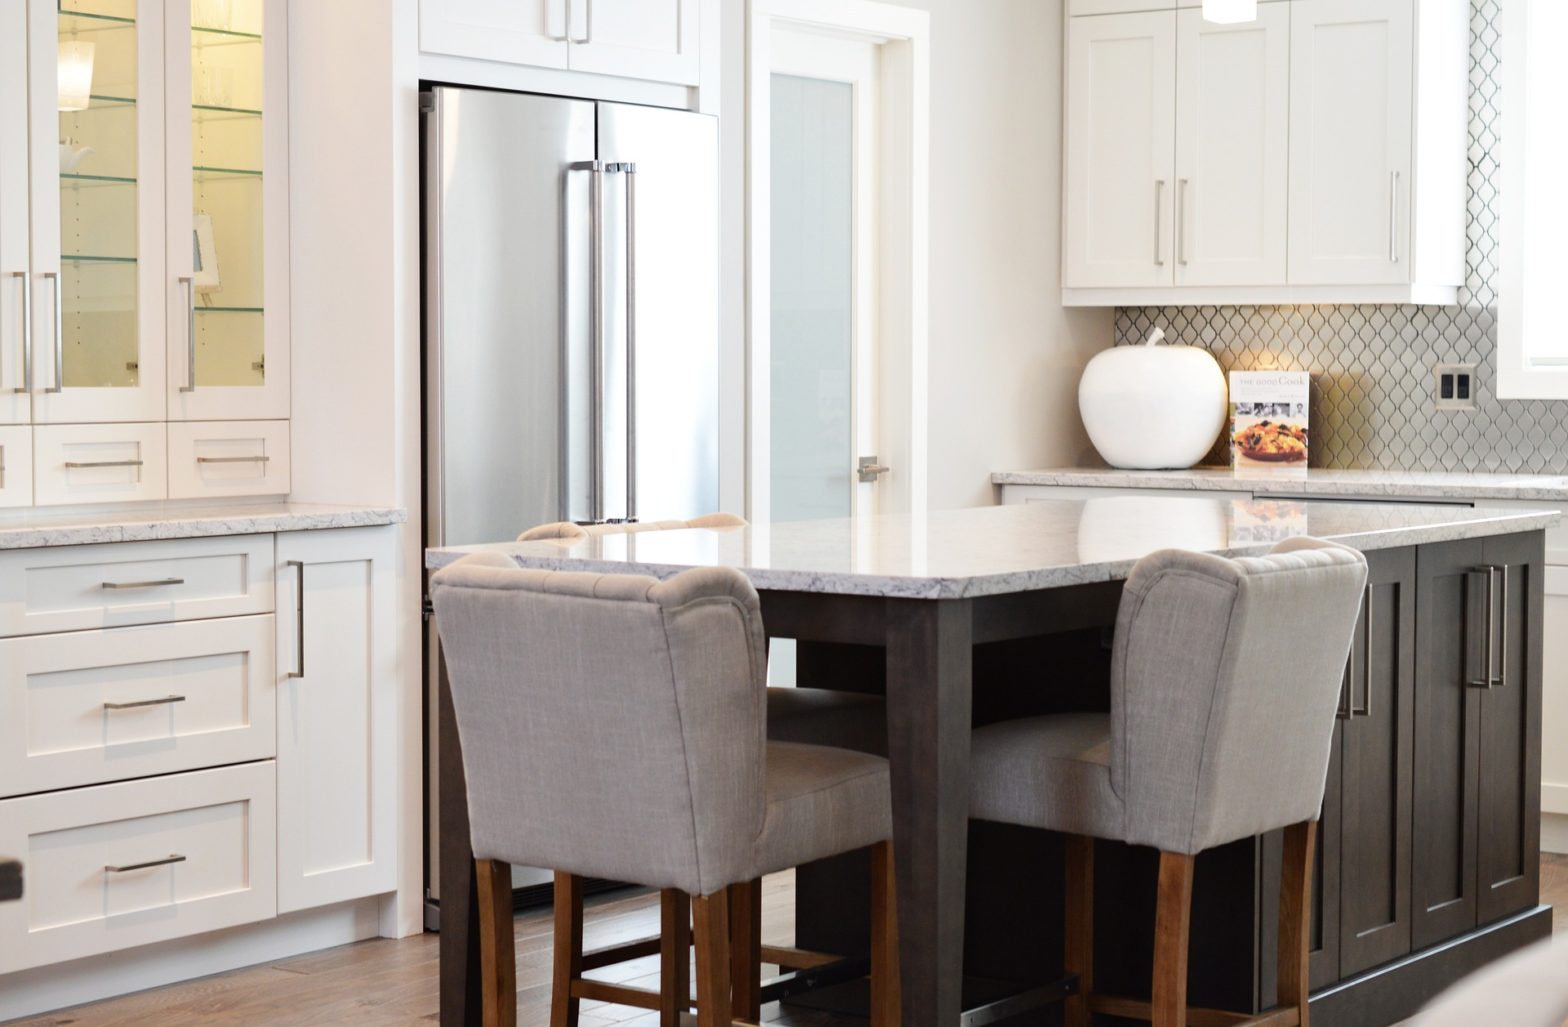 If you have enough floor space to afford a kitchen island, it's a great option for more space to prepare food!